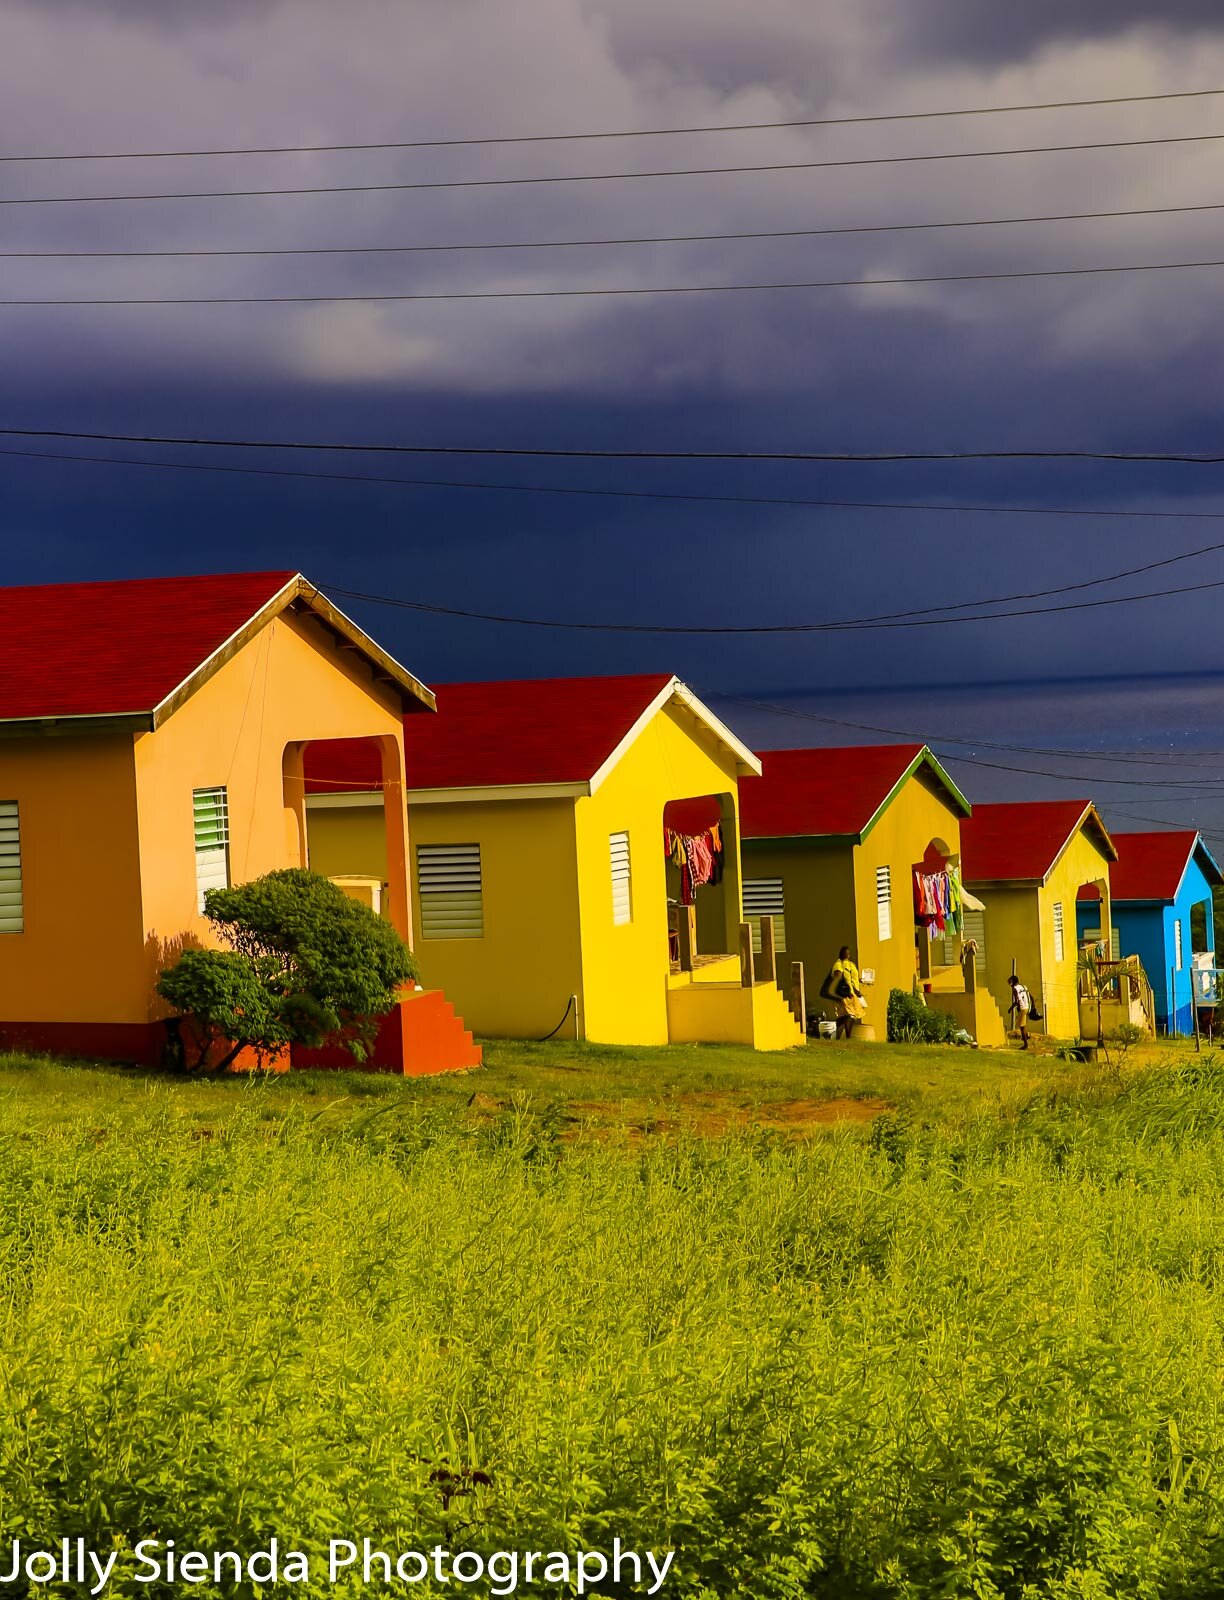 Colorful, Caribbean row houses, hanging laundry, meadow, people